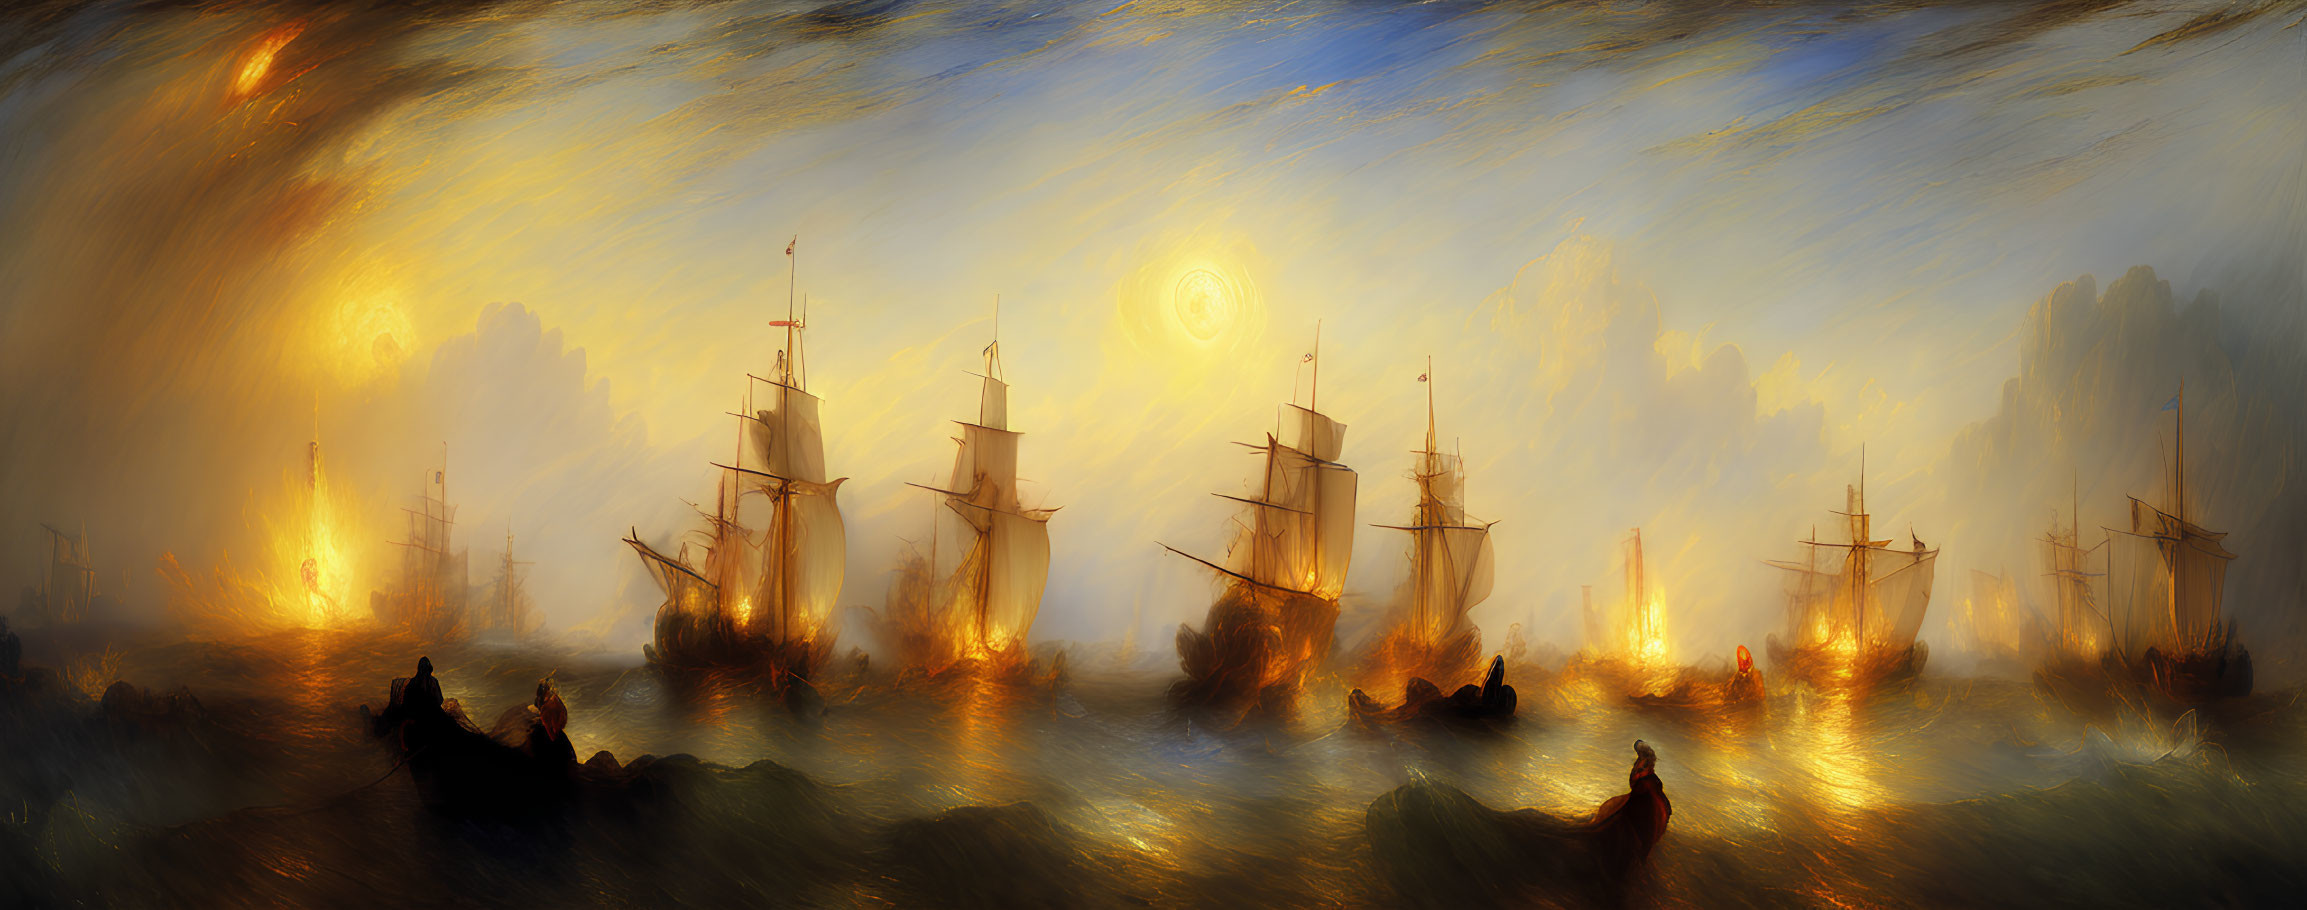 Panoramic artwork featuring ships on turbulent seas and fiery sky